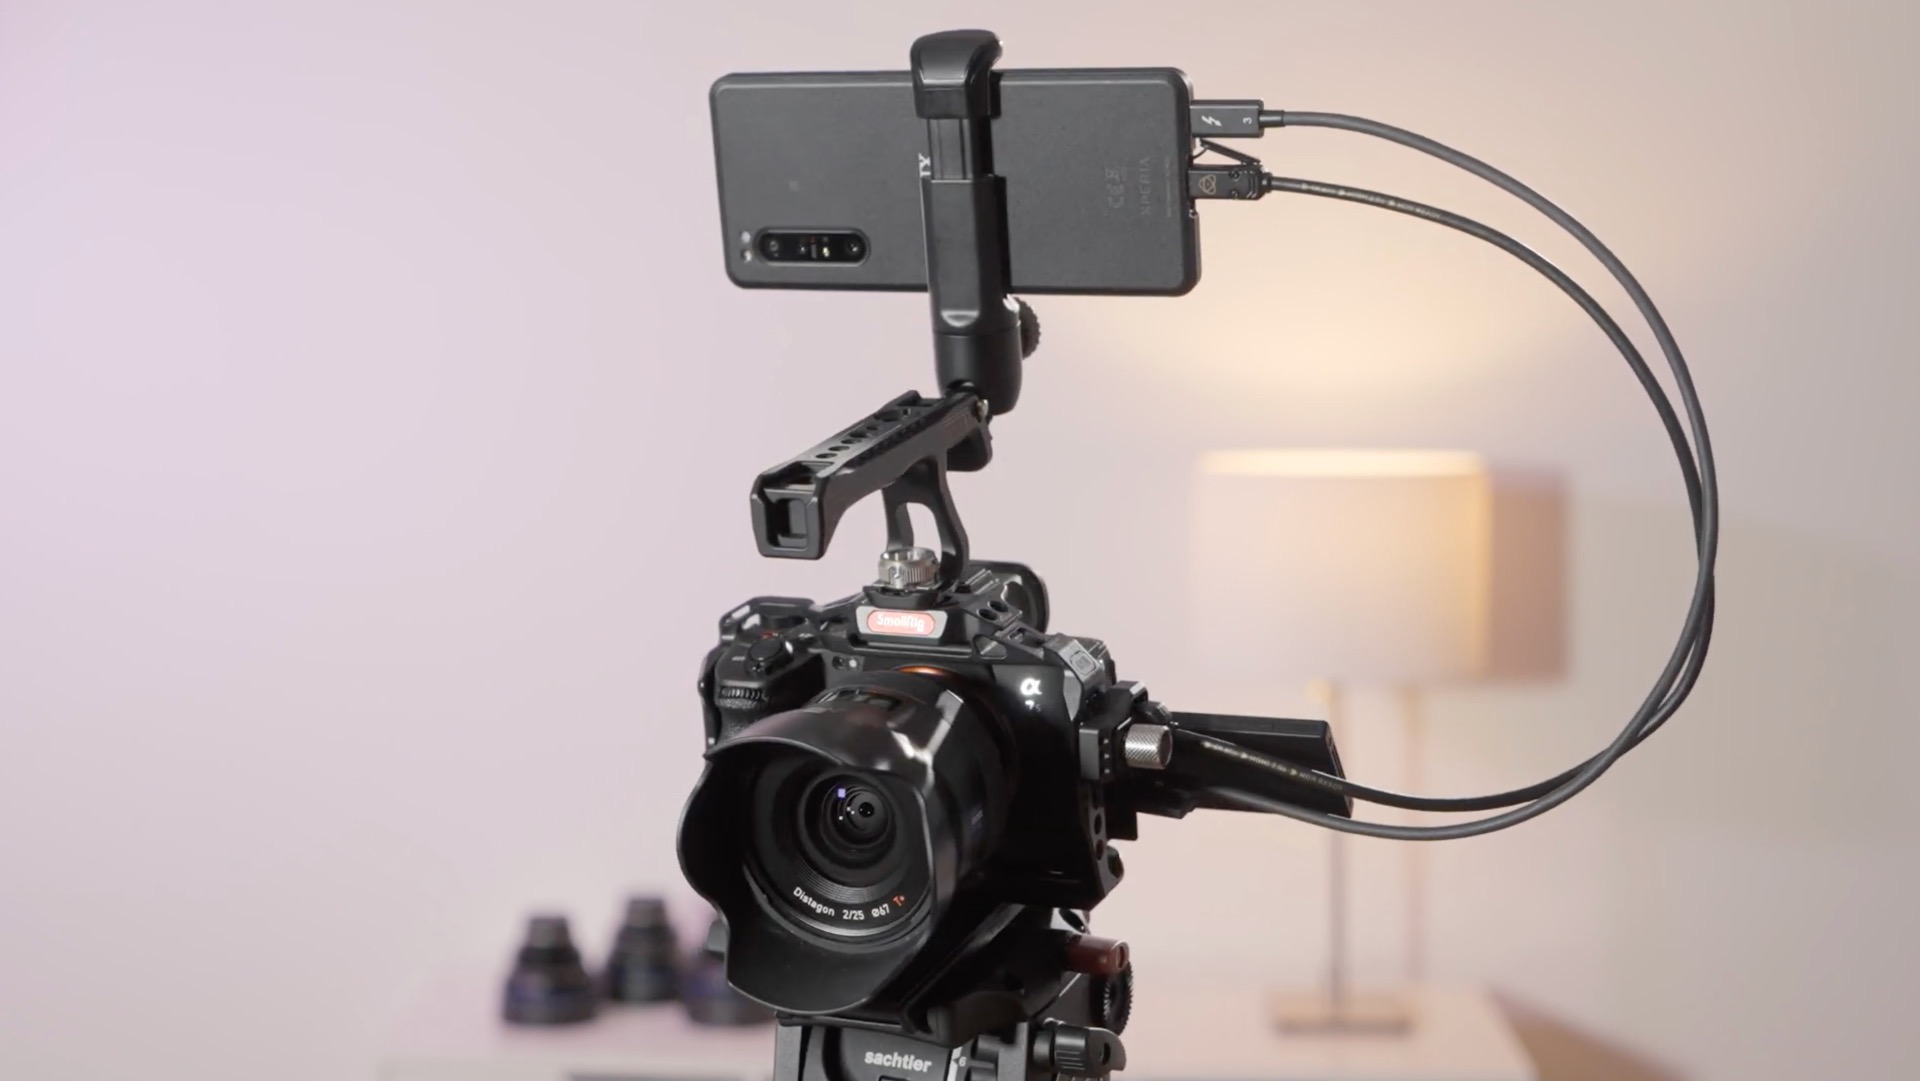 commando trog Stoffig Sony Xperia PRO Review as a Camera Monitor and Live Streaming Phone | CineD